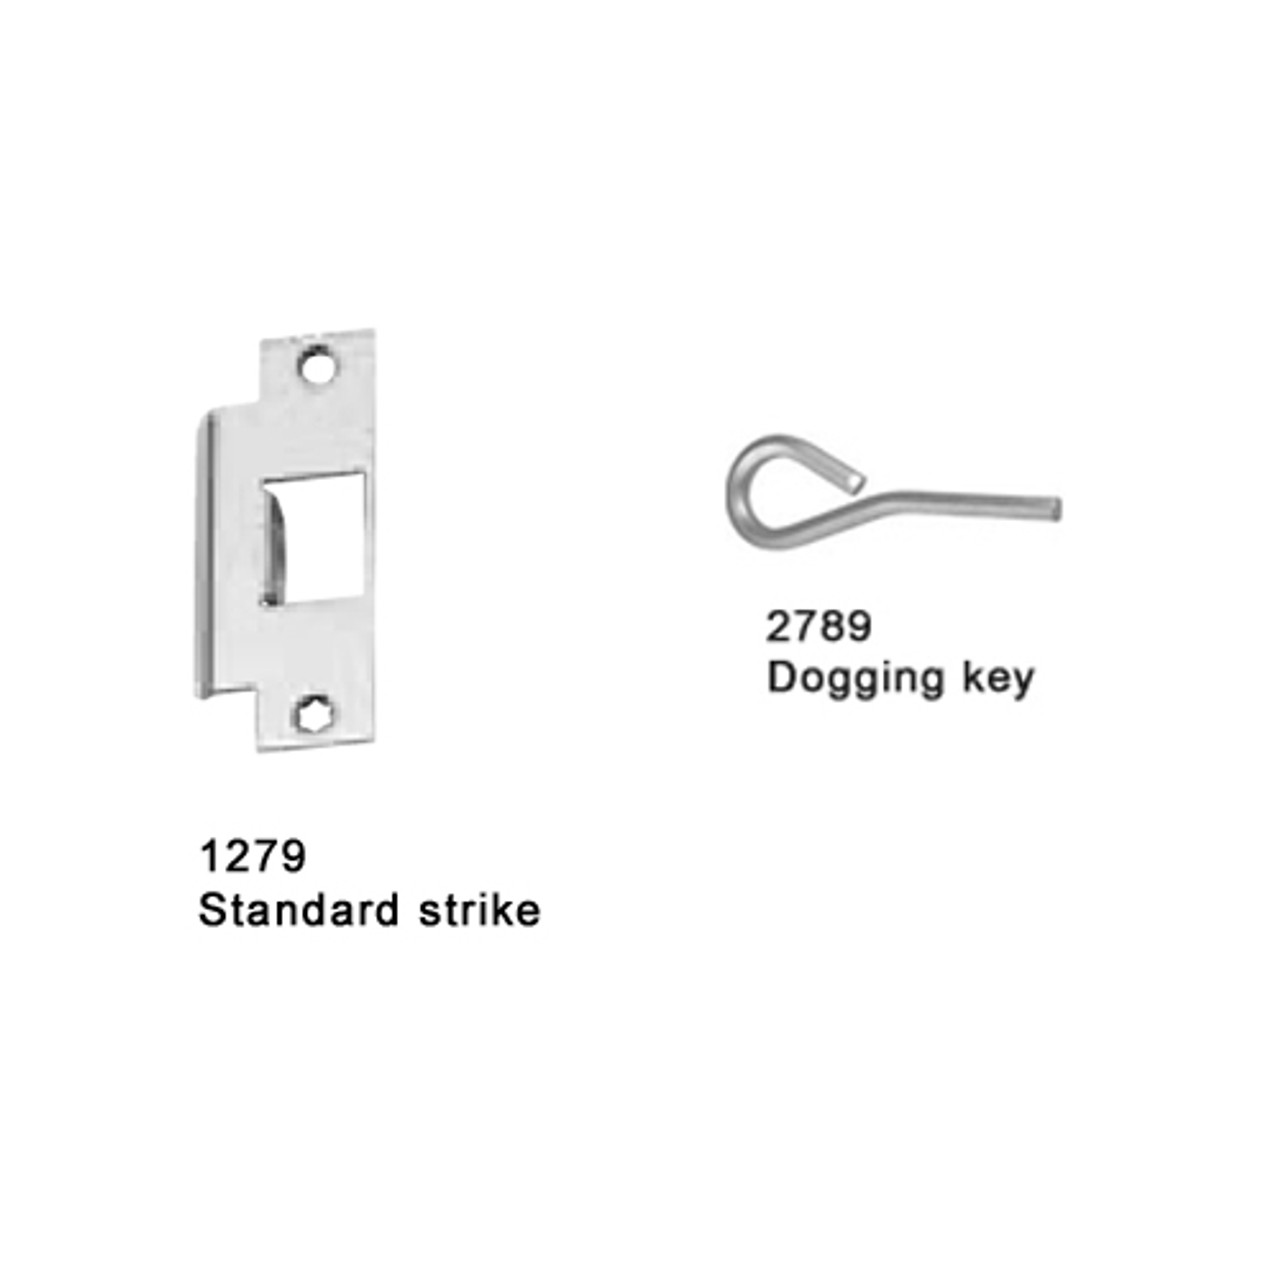 25-M-L-DT-DANE-US3-4-RHR Falcon 25 Series Mortise Lock Devices 510L-DT Dane Lever Trim with Dummy Trim in Polished Brass